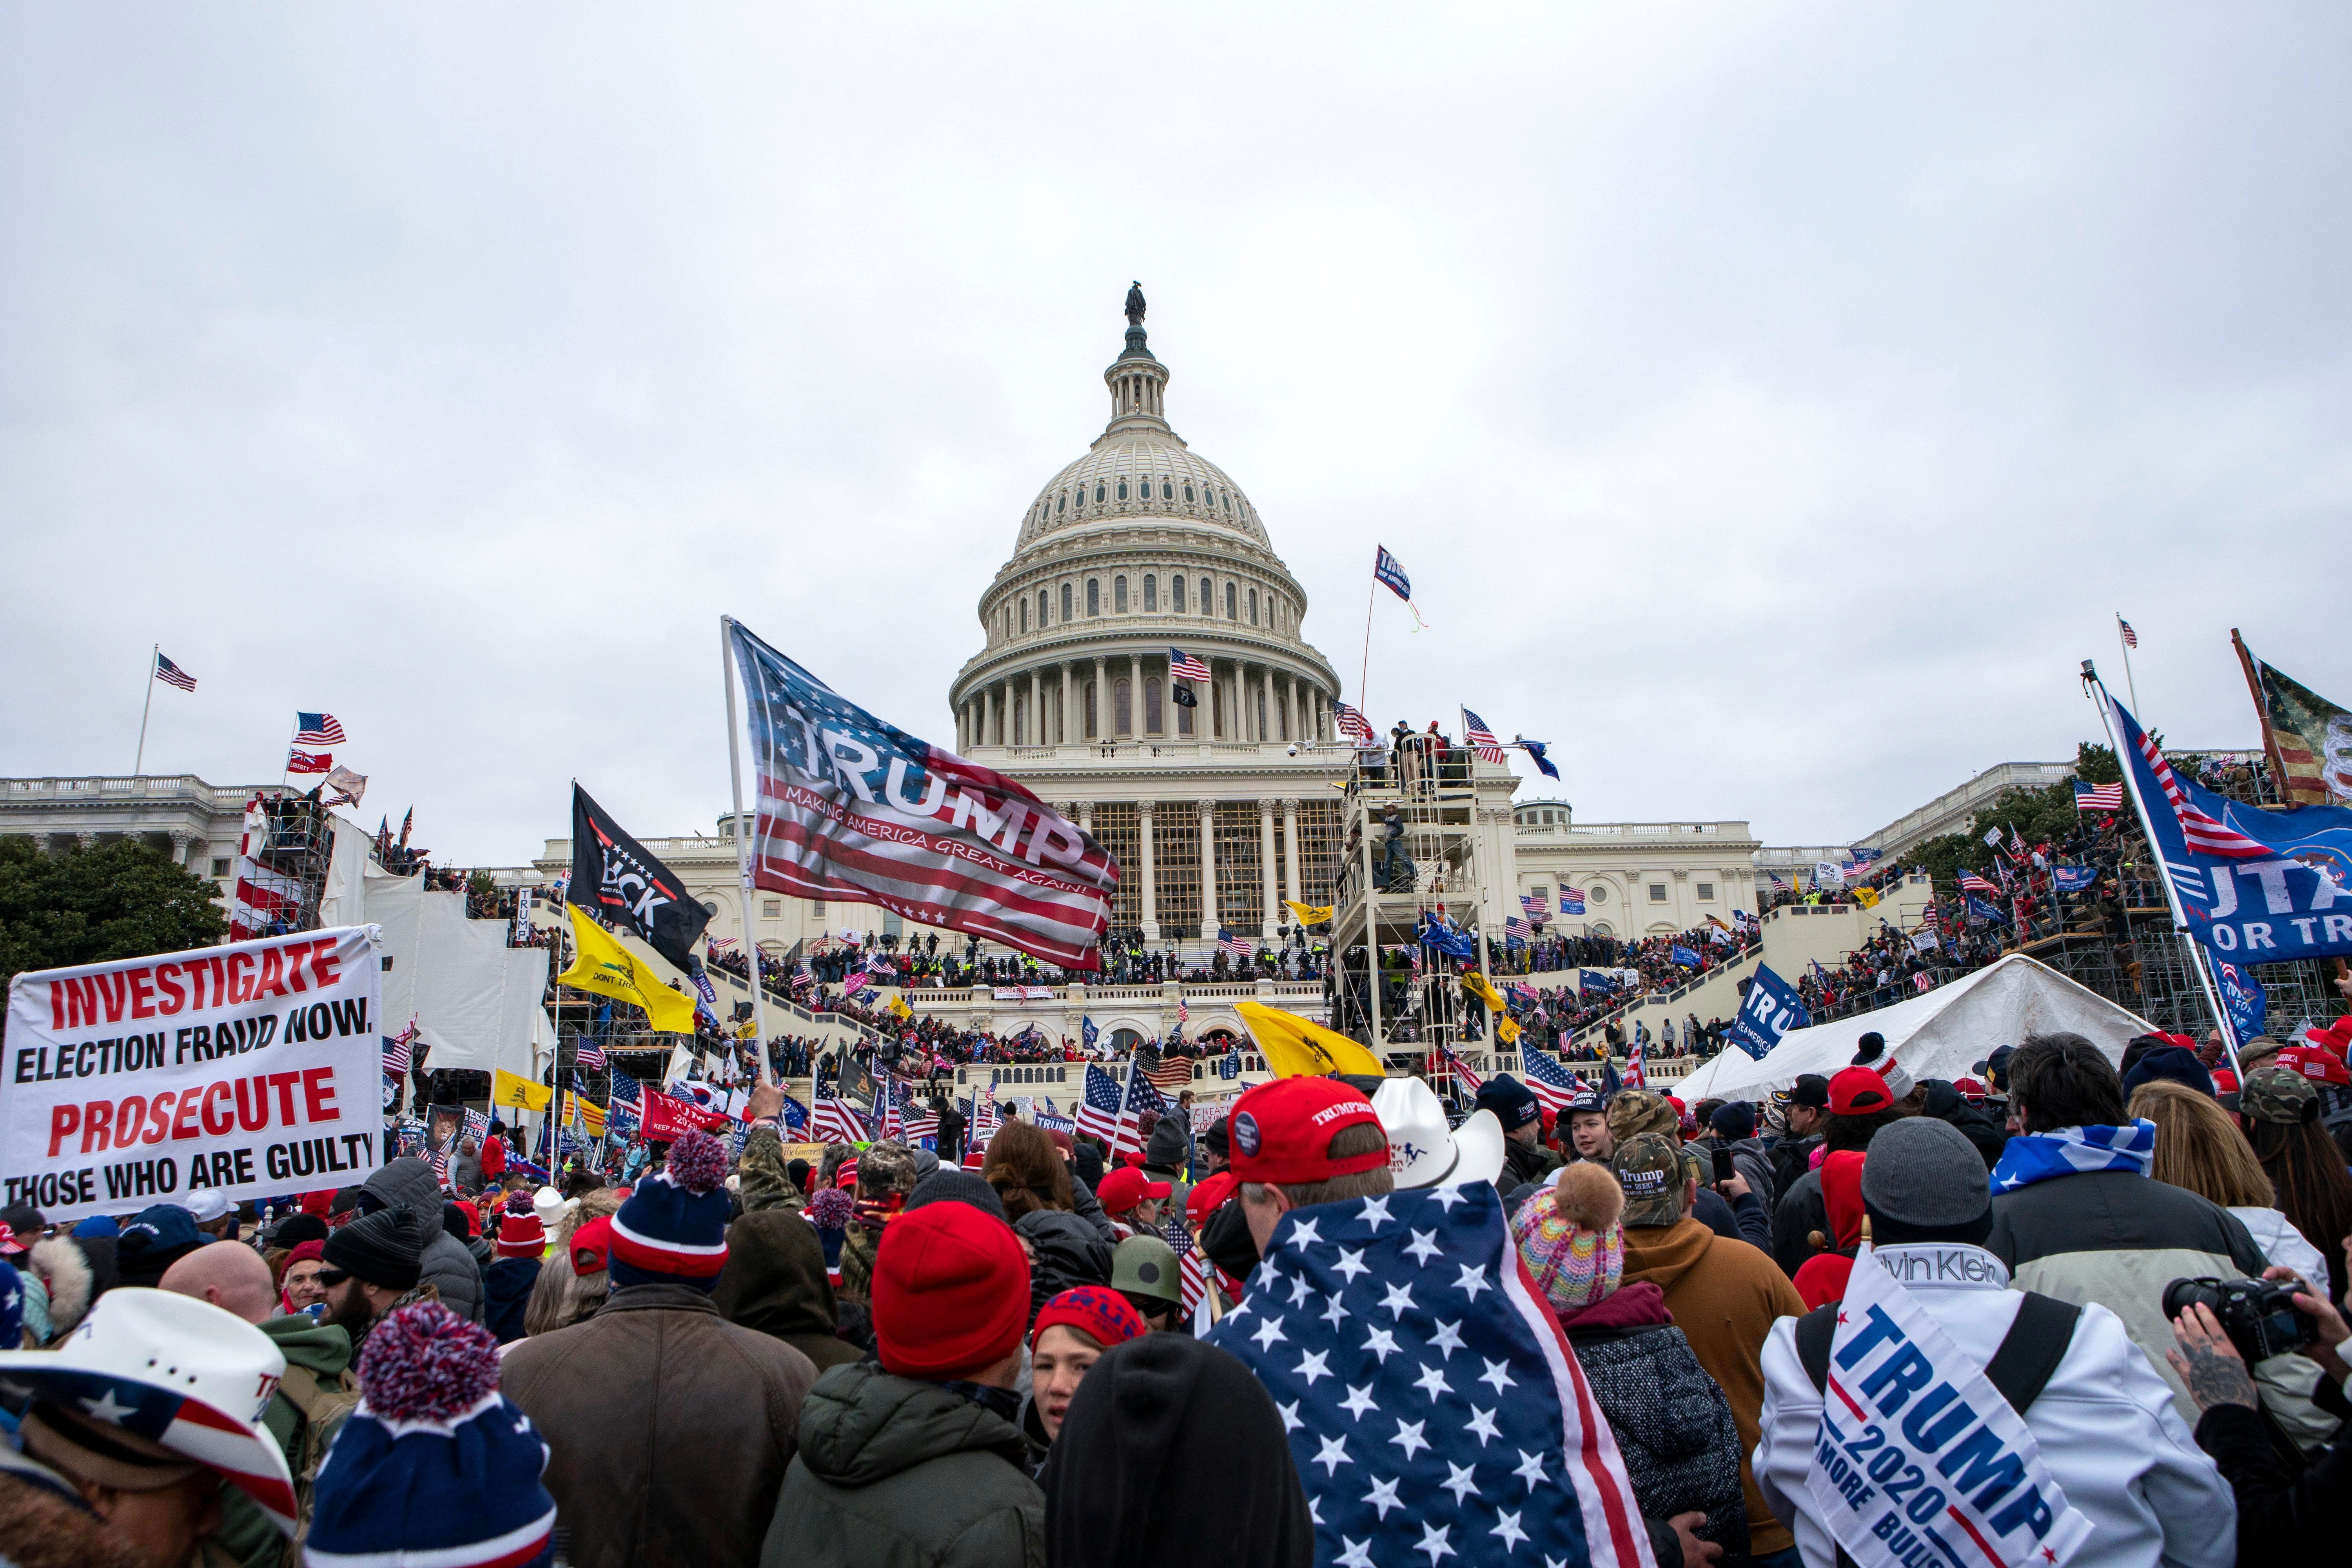 A mob loyal to Donald Trump stormed the US Capitol on 6 January, 2021 while Congress convened to certify the results of the 2020 presidential election.